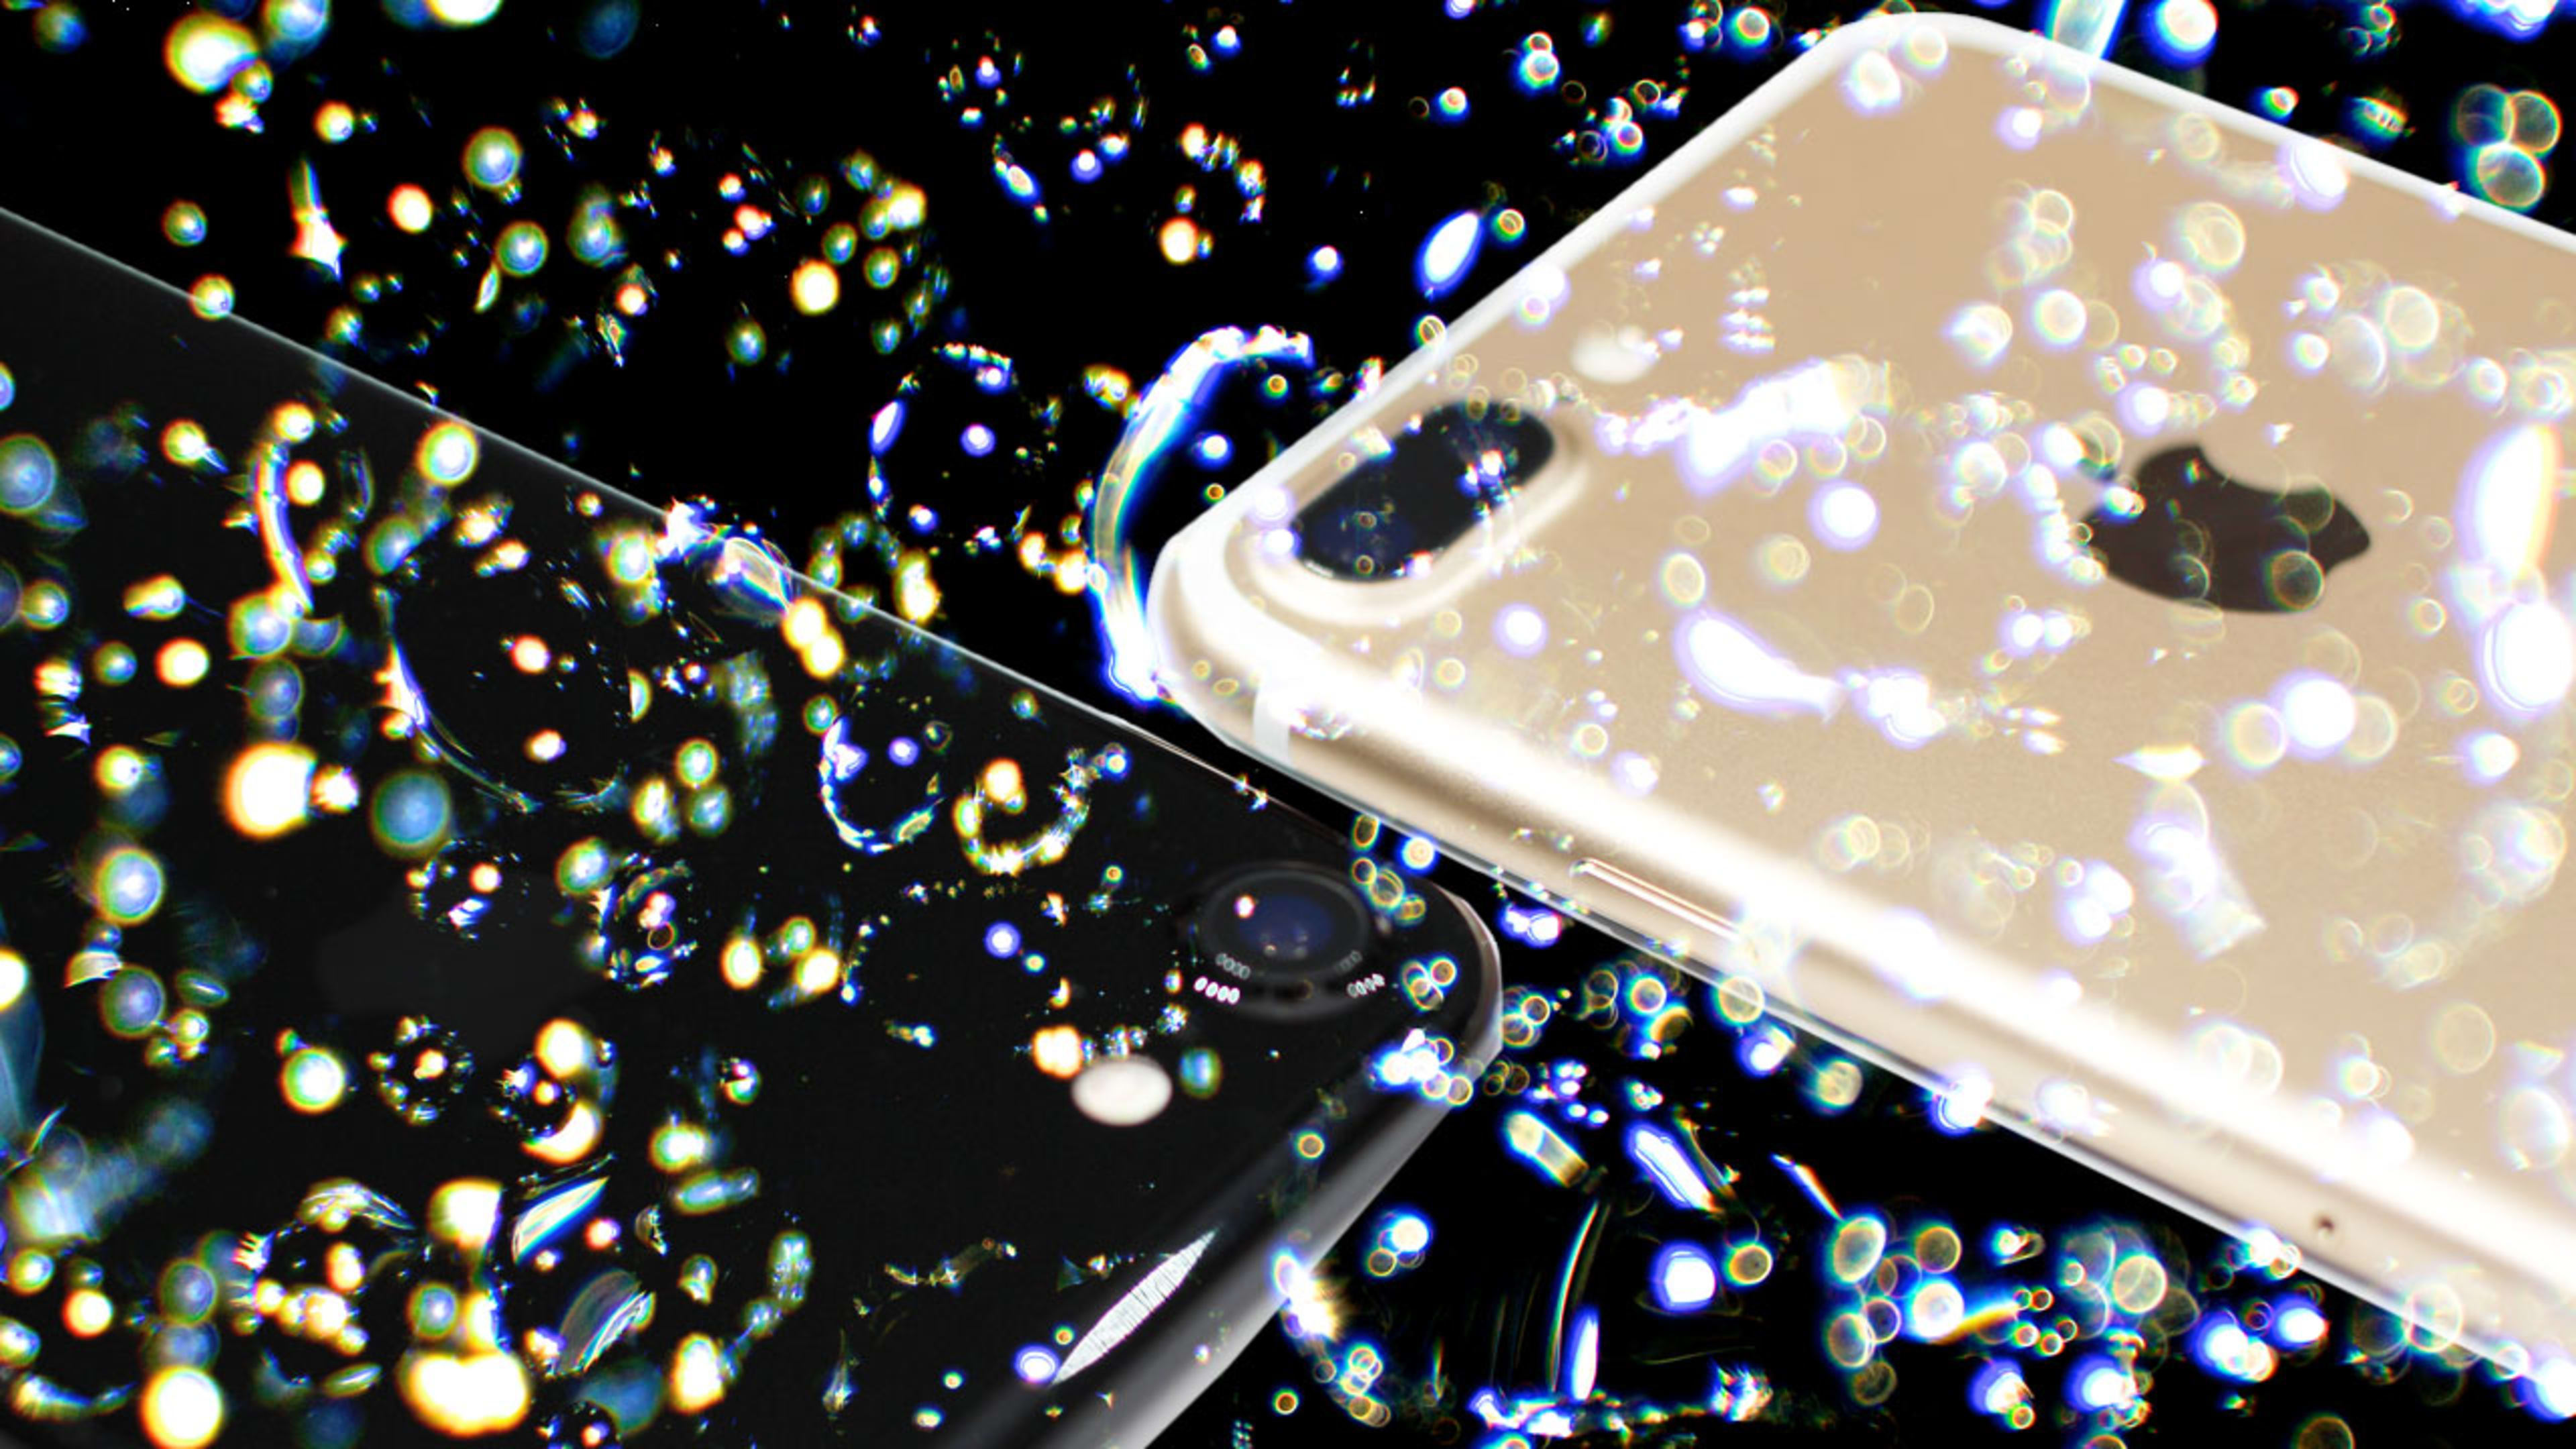 The Next iPhone Will Most Likely Be Waterproof, Even Under Warranty